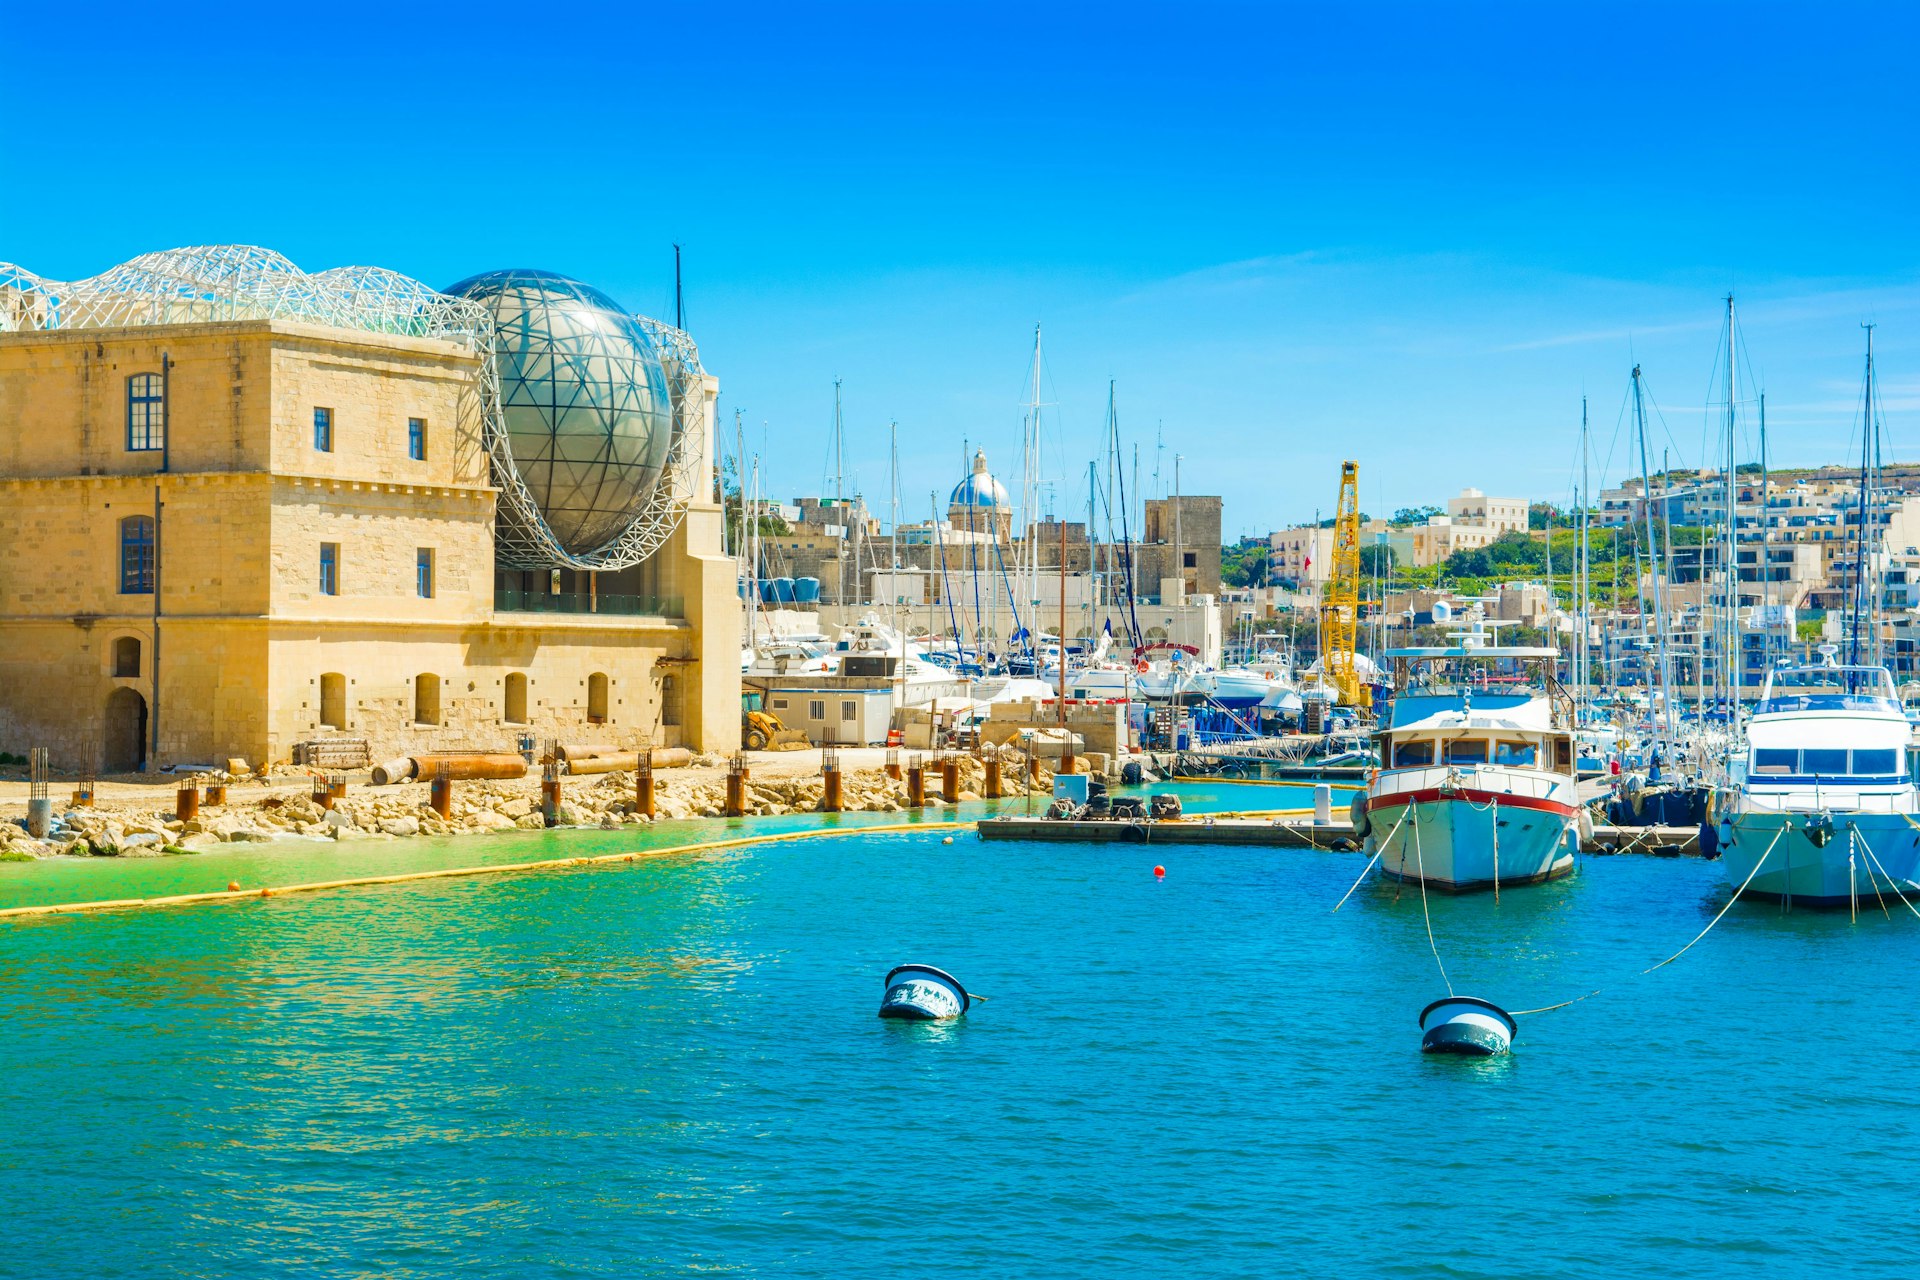 A view across the harbor to the Esplora Science Centre in Malta with its glass-domed roof